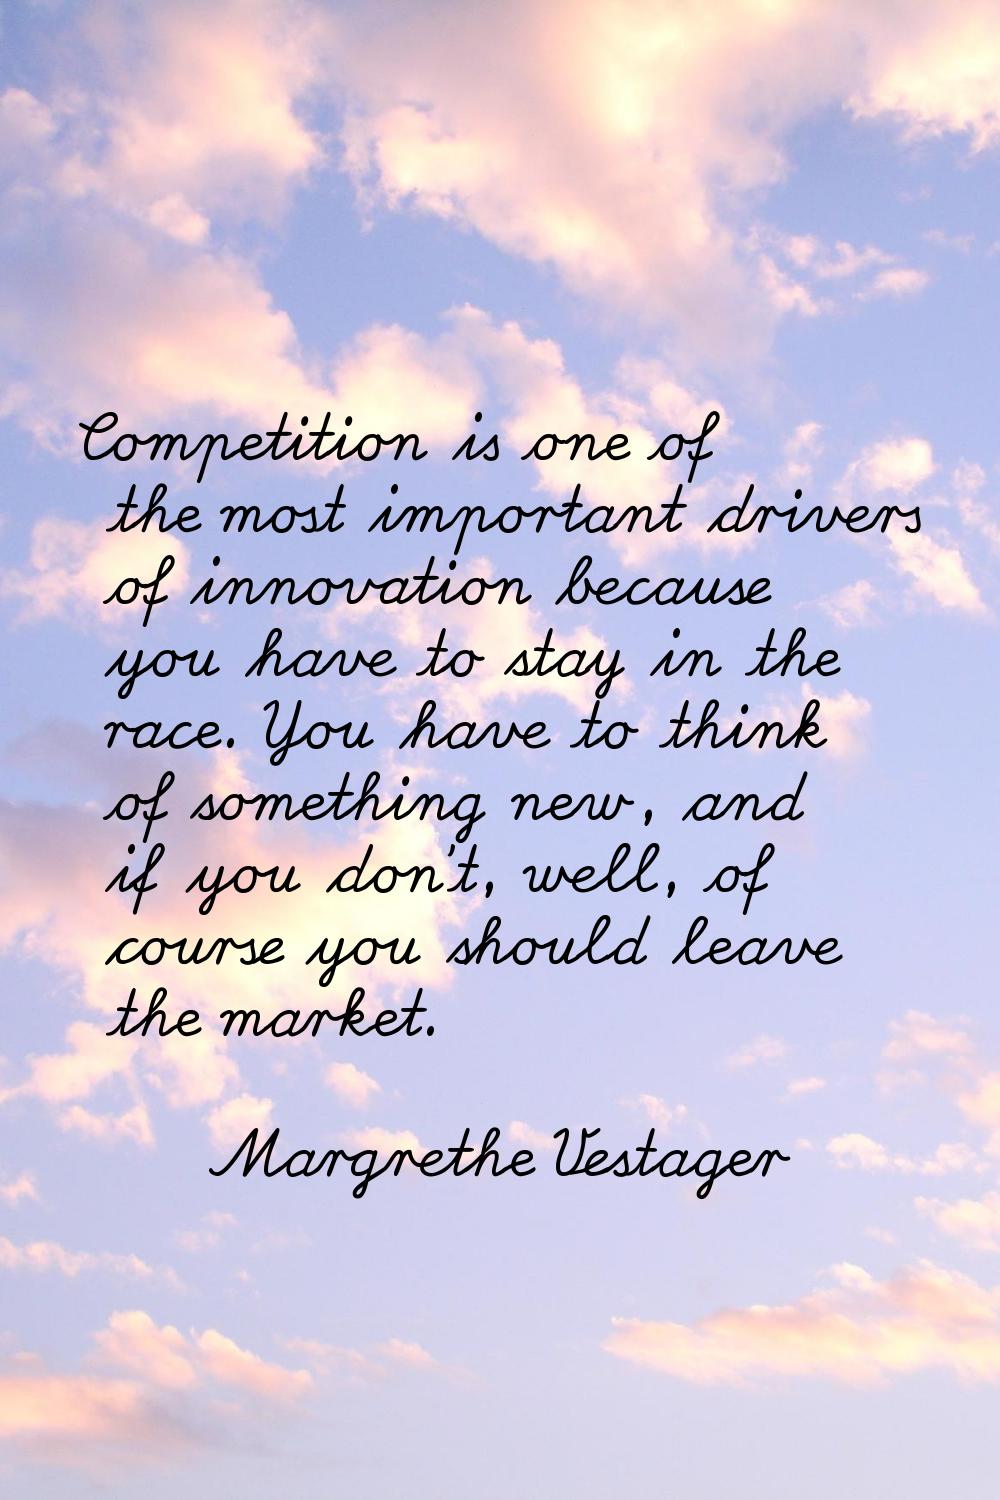 Competition is one of the most important drivers of innovation because you have to stay in the race